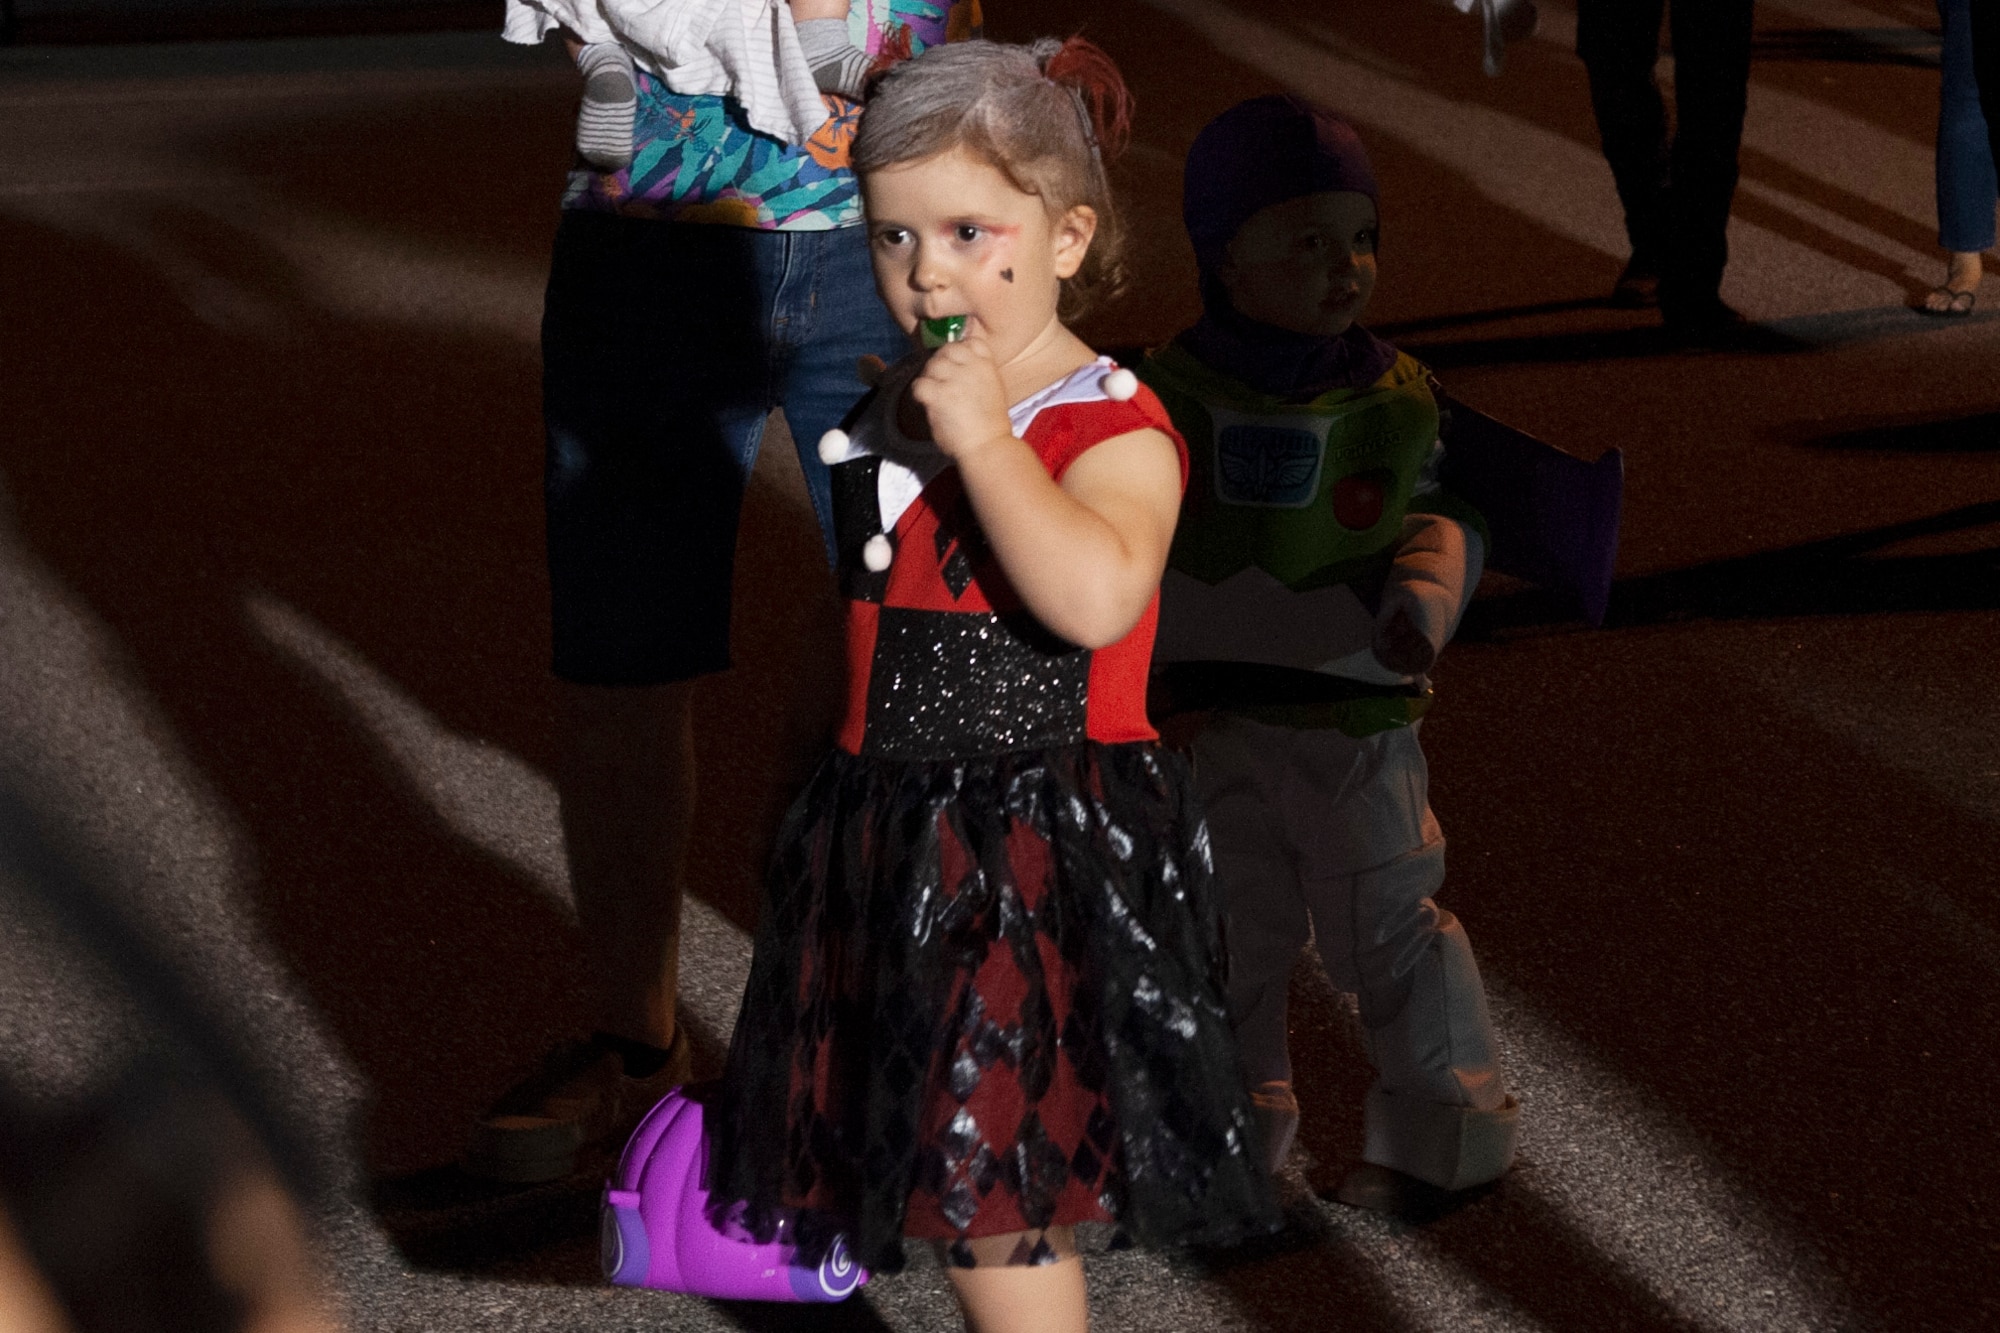 A participant eats candy during Trunk or Treat Oct. 25, 2019, at Moody Air Force Base, Ga. Participants, dressed in costumes, received candy from volunteers, who decorated their trunks. (U.S. Air Force photo by Airman 1st Class Jasmine M. Barnes)